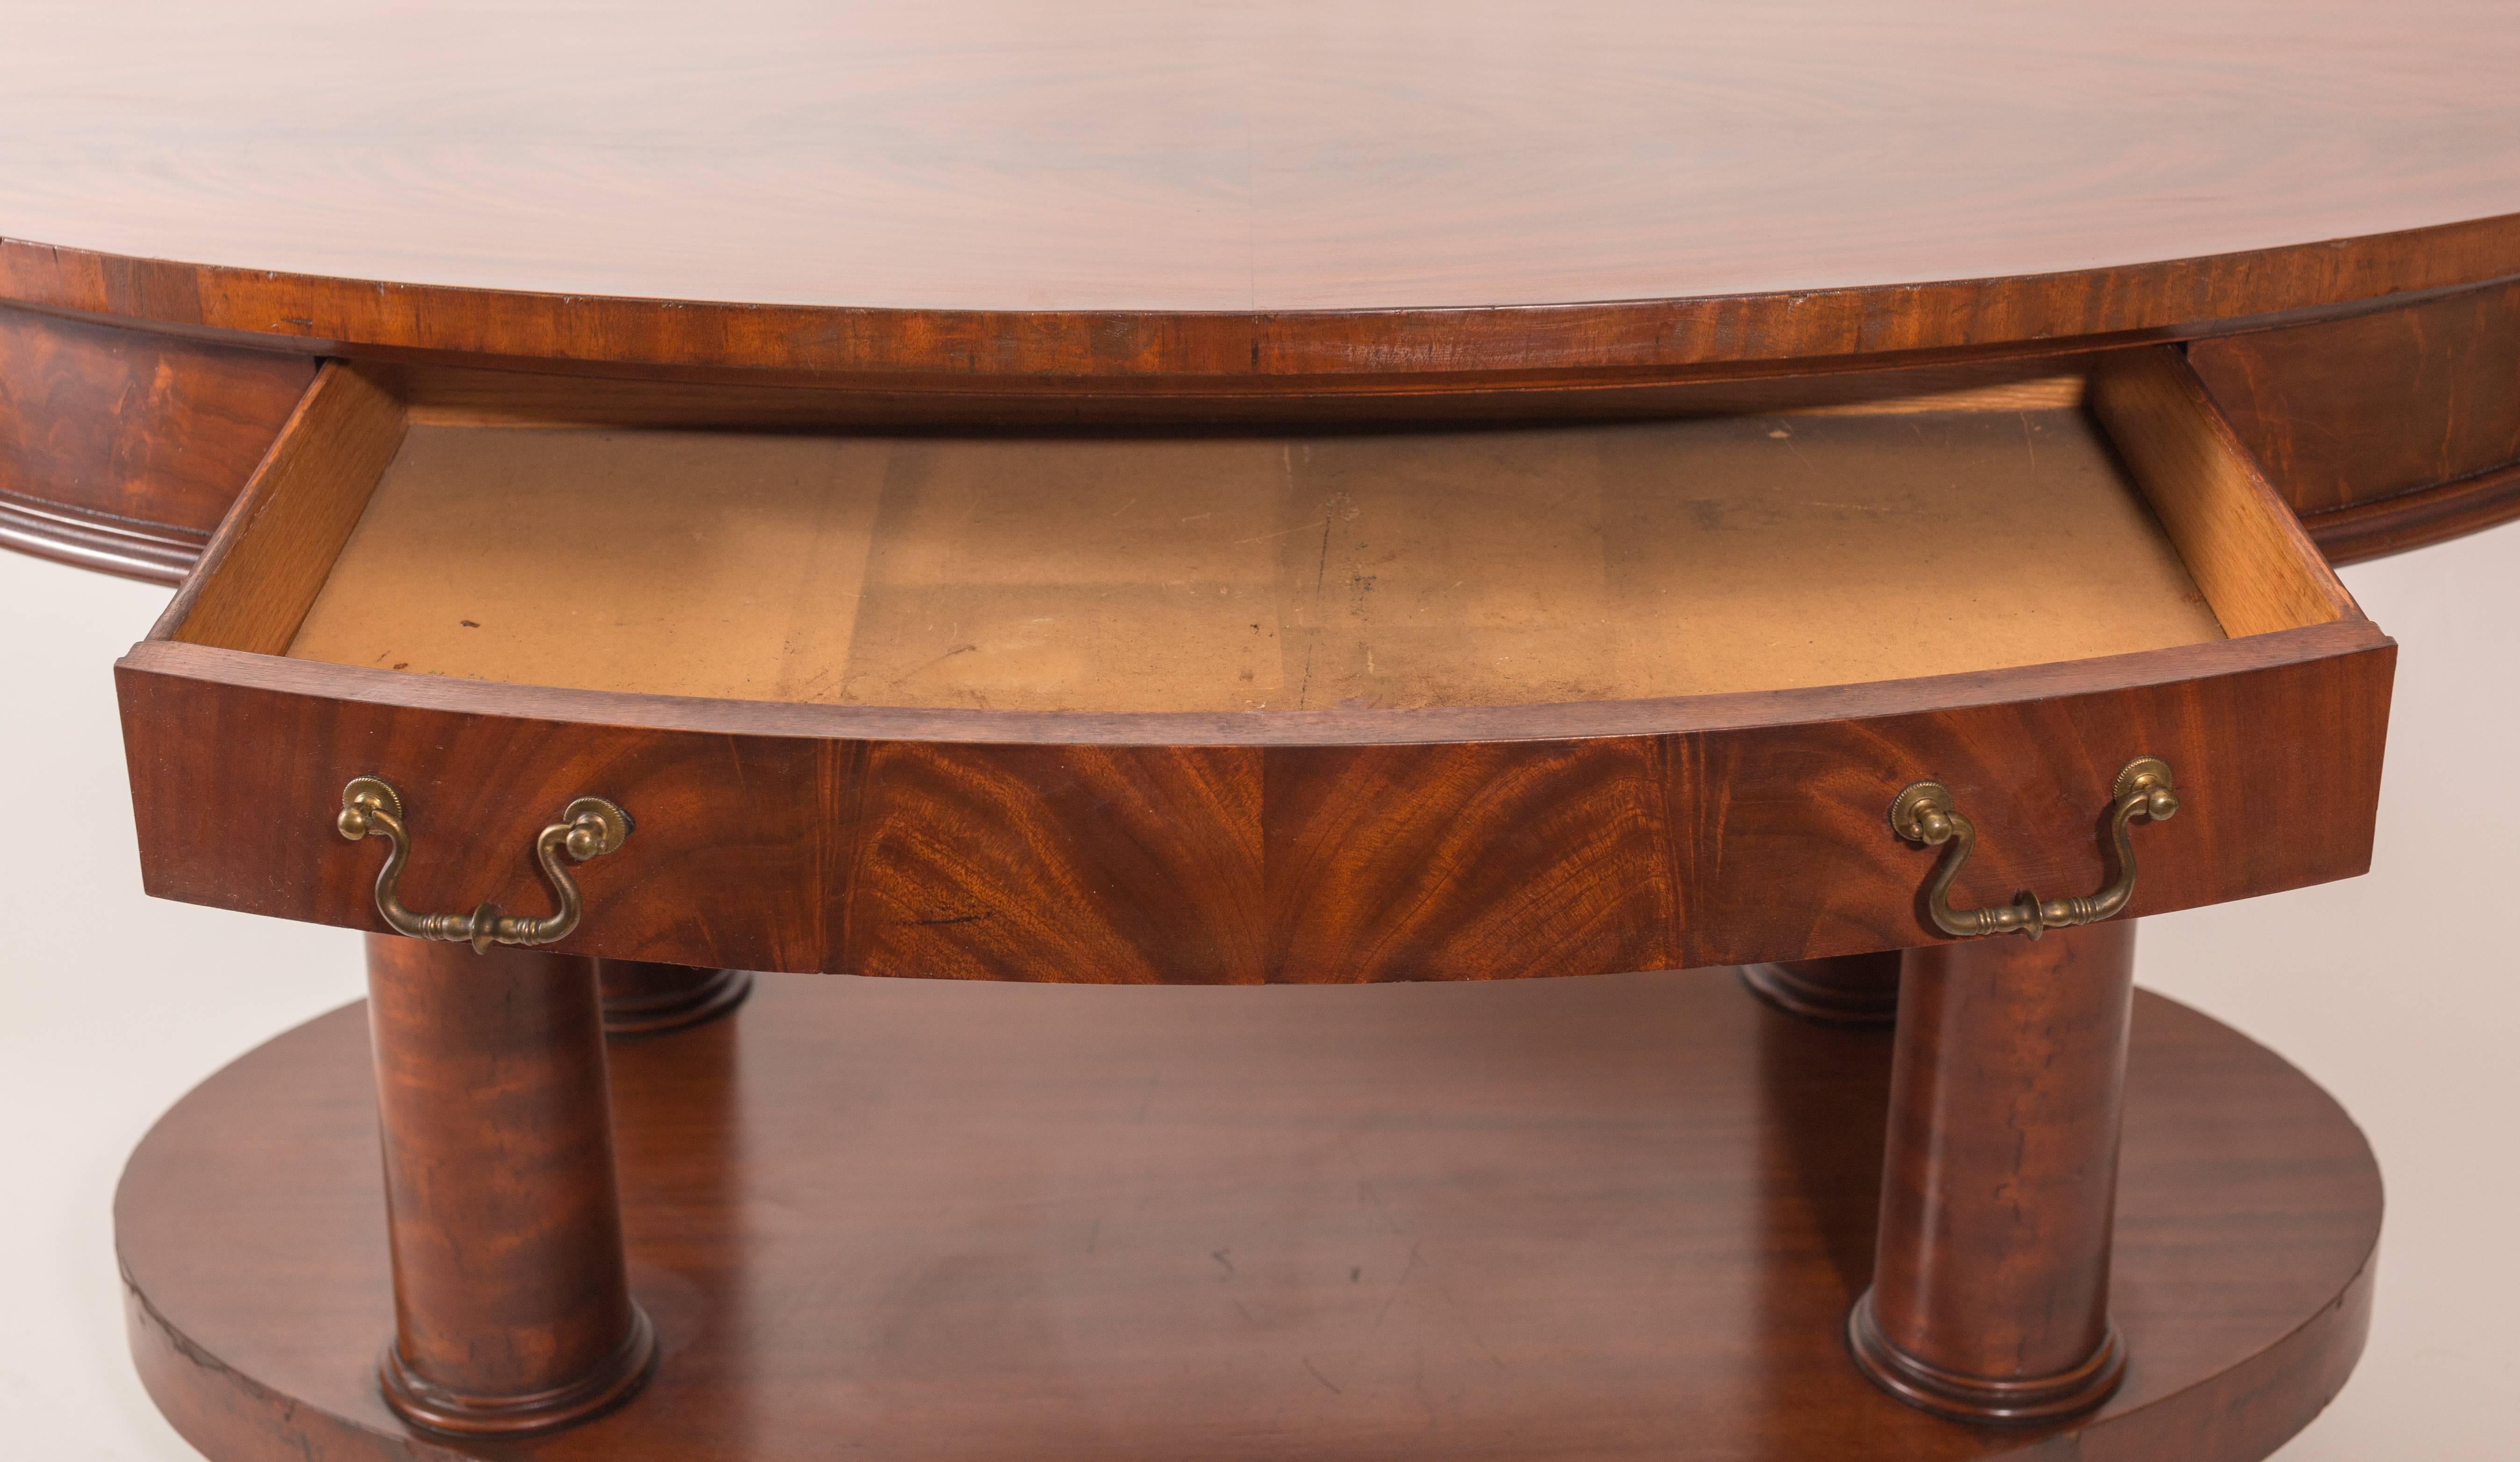 antique oval table with claw feet